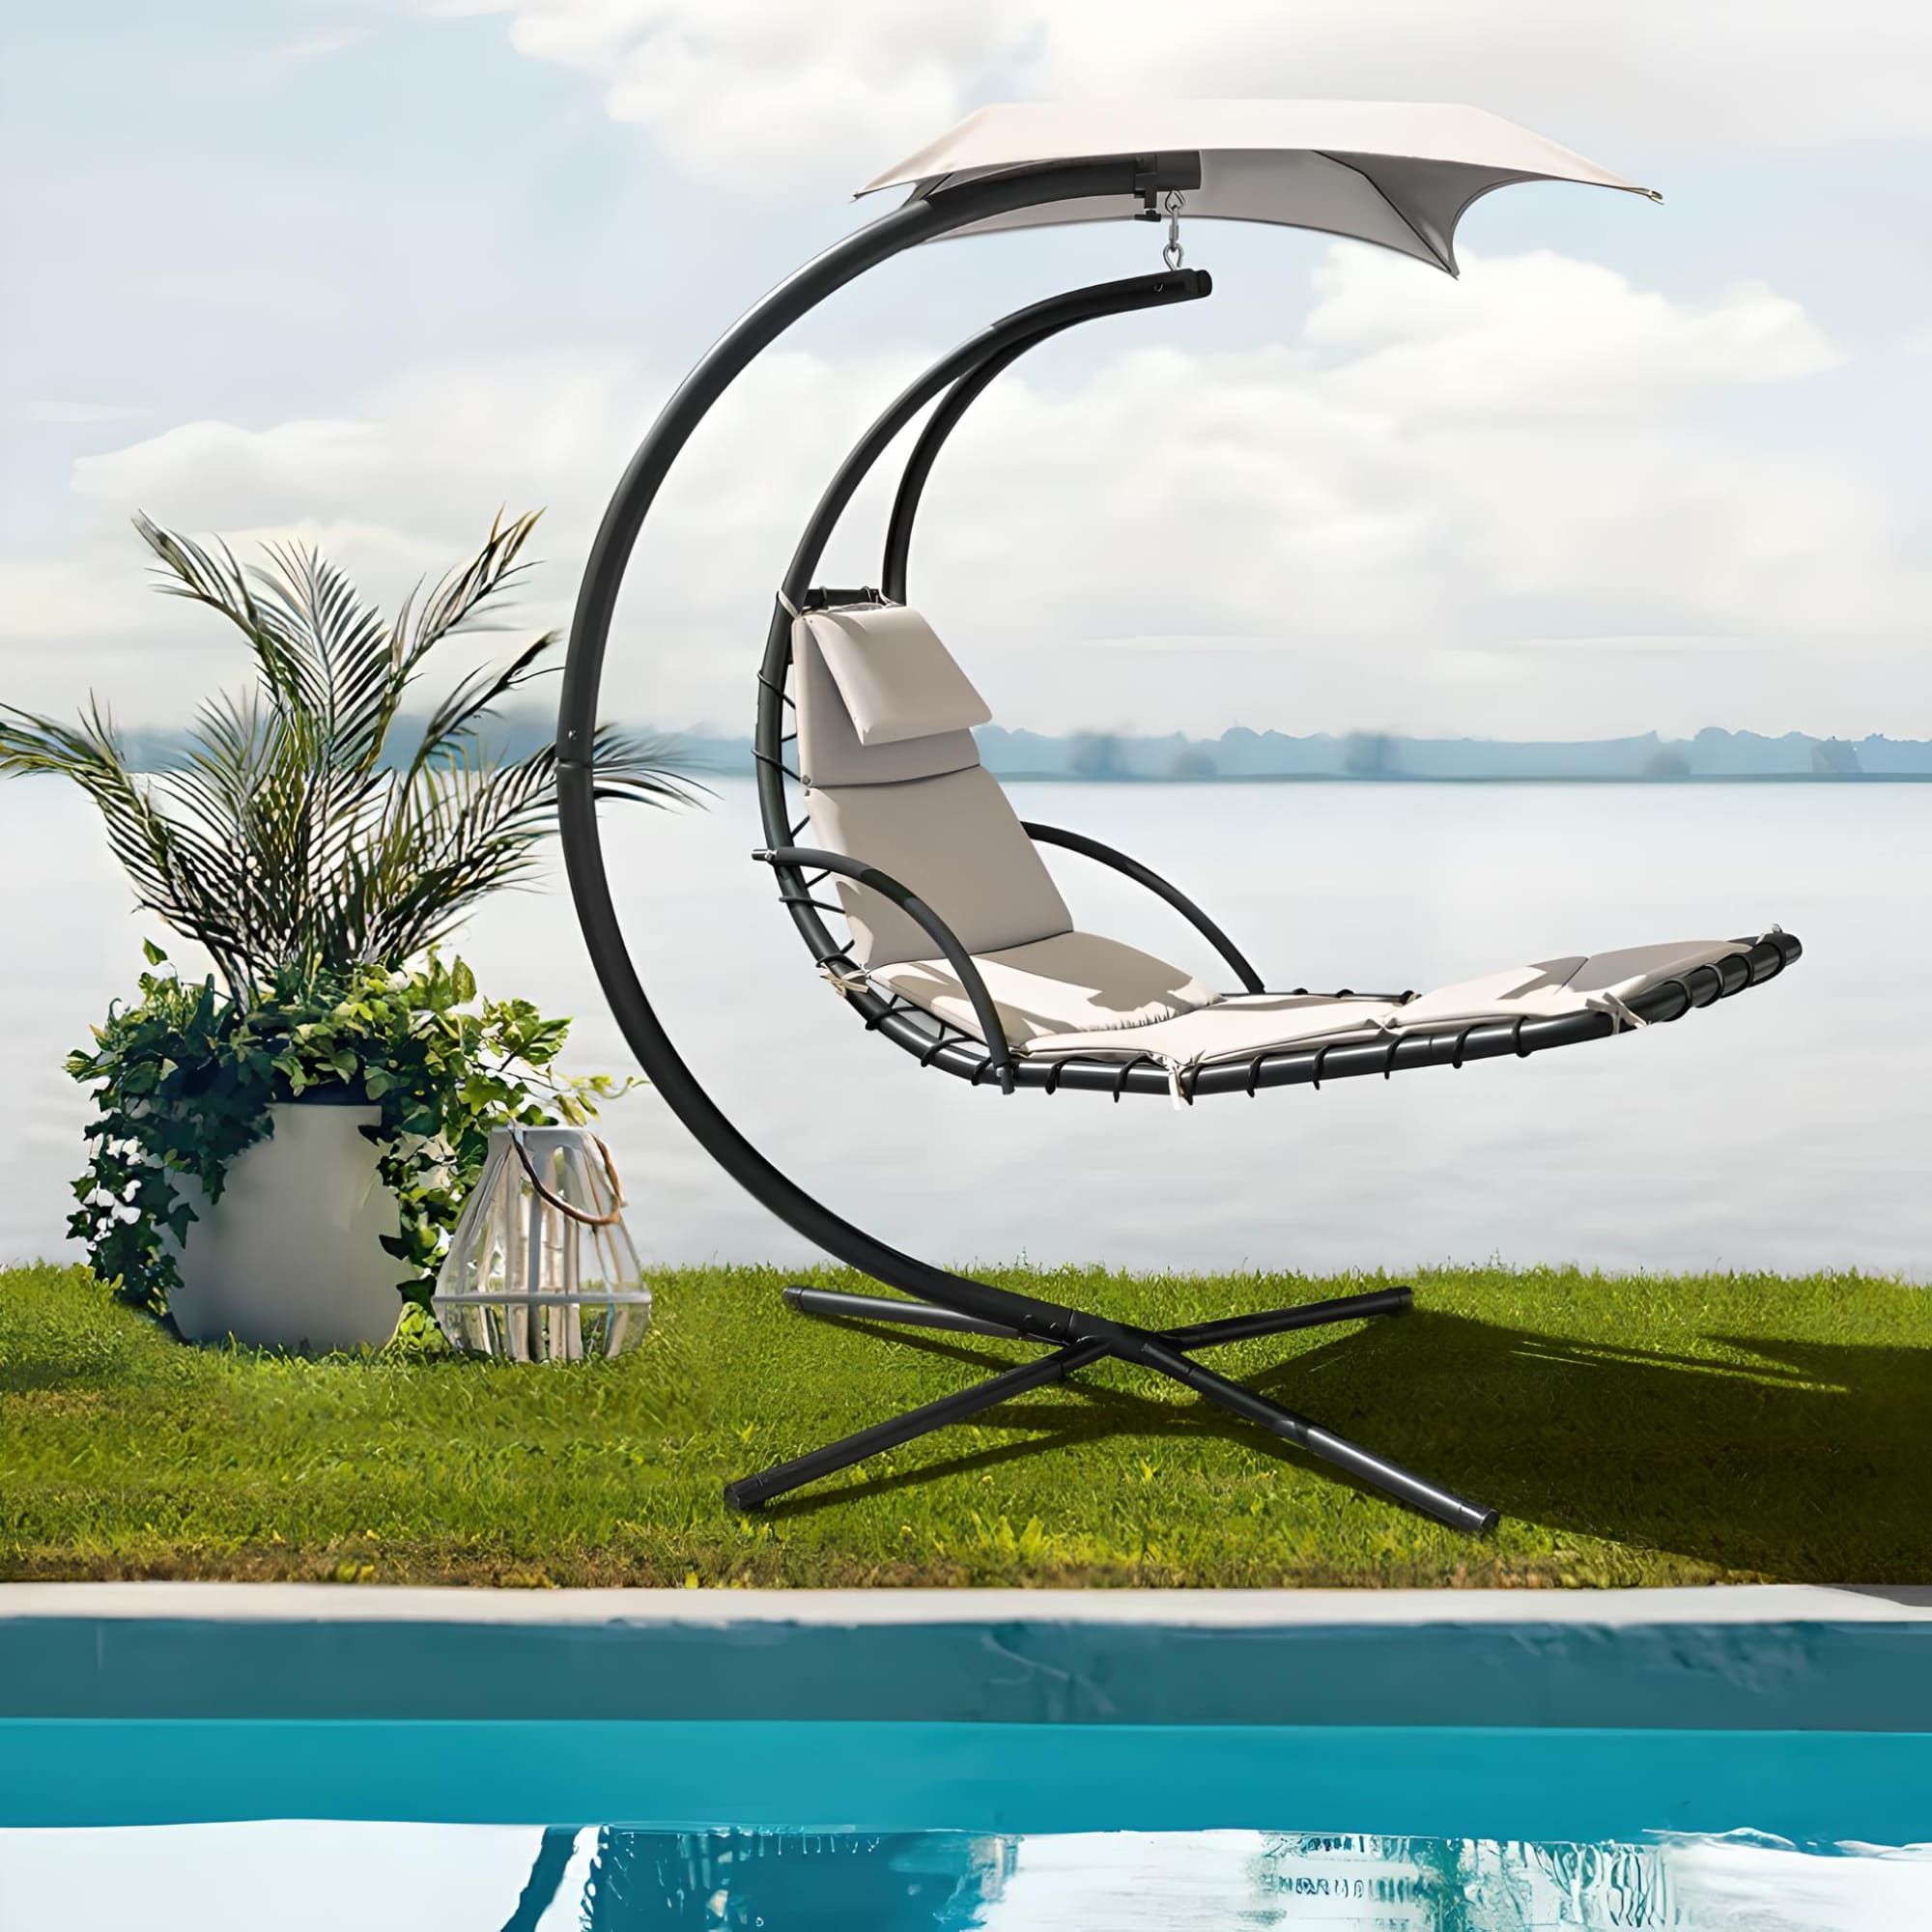 design-of-outdoor-hanging-curved-steel-chaise-lounge-chair-swing